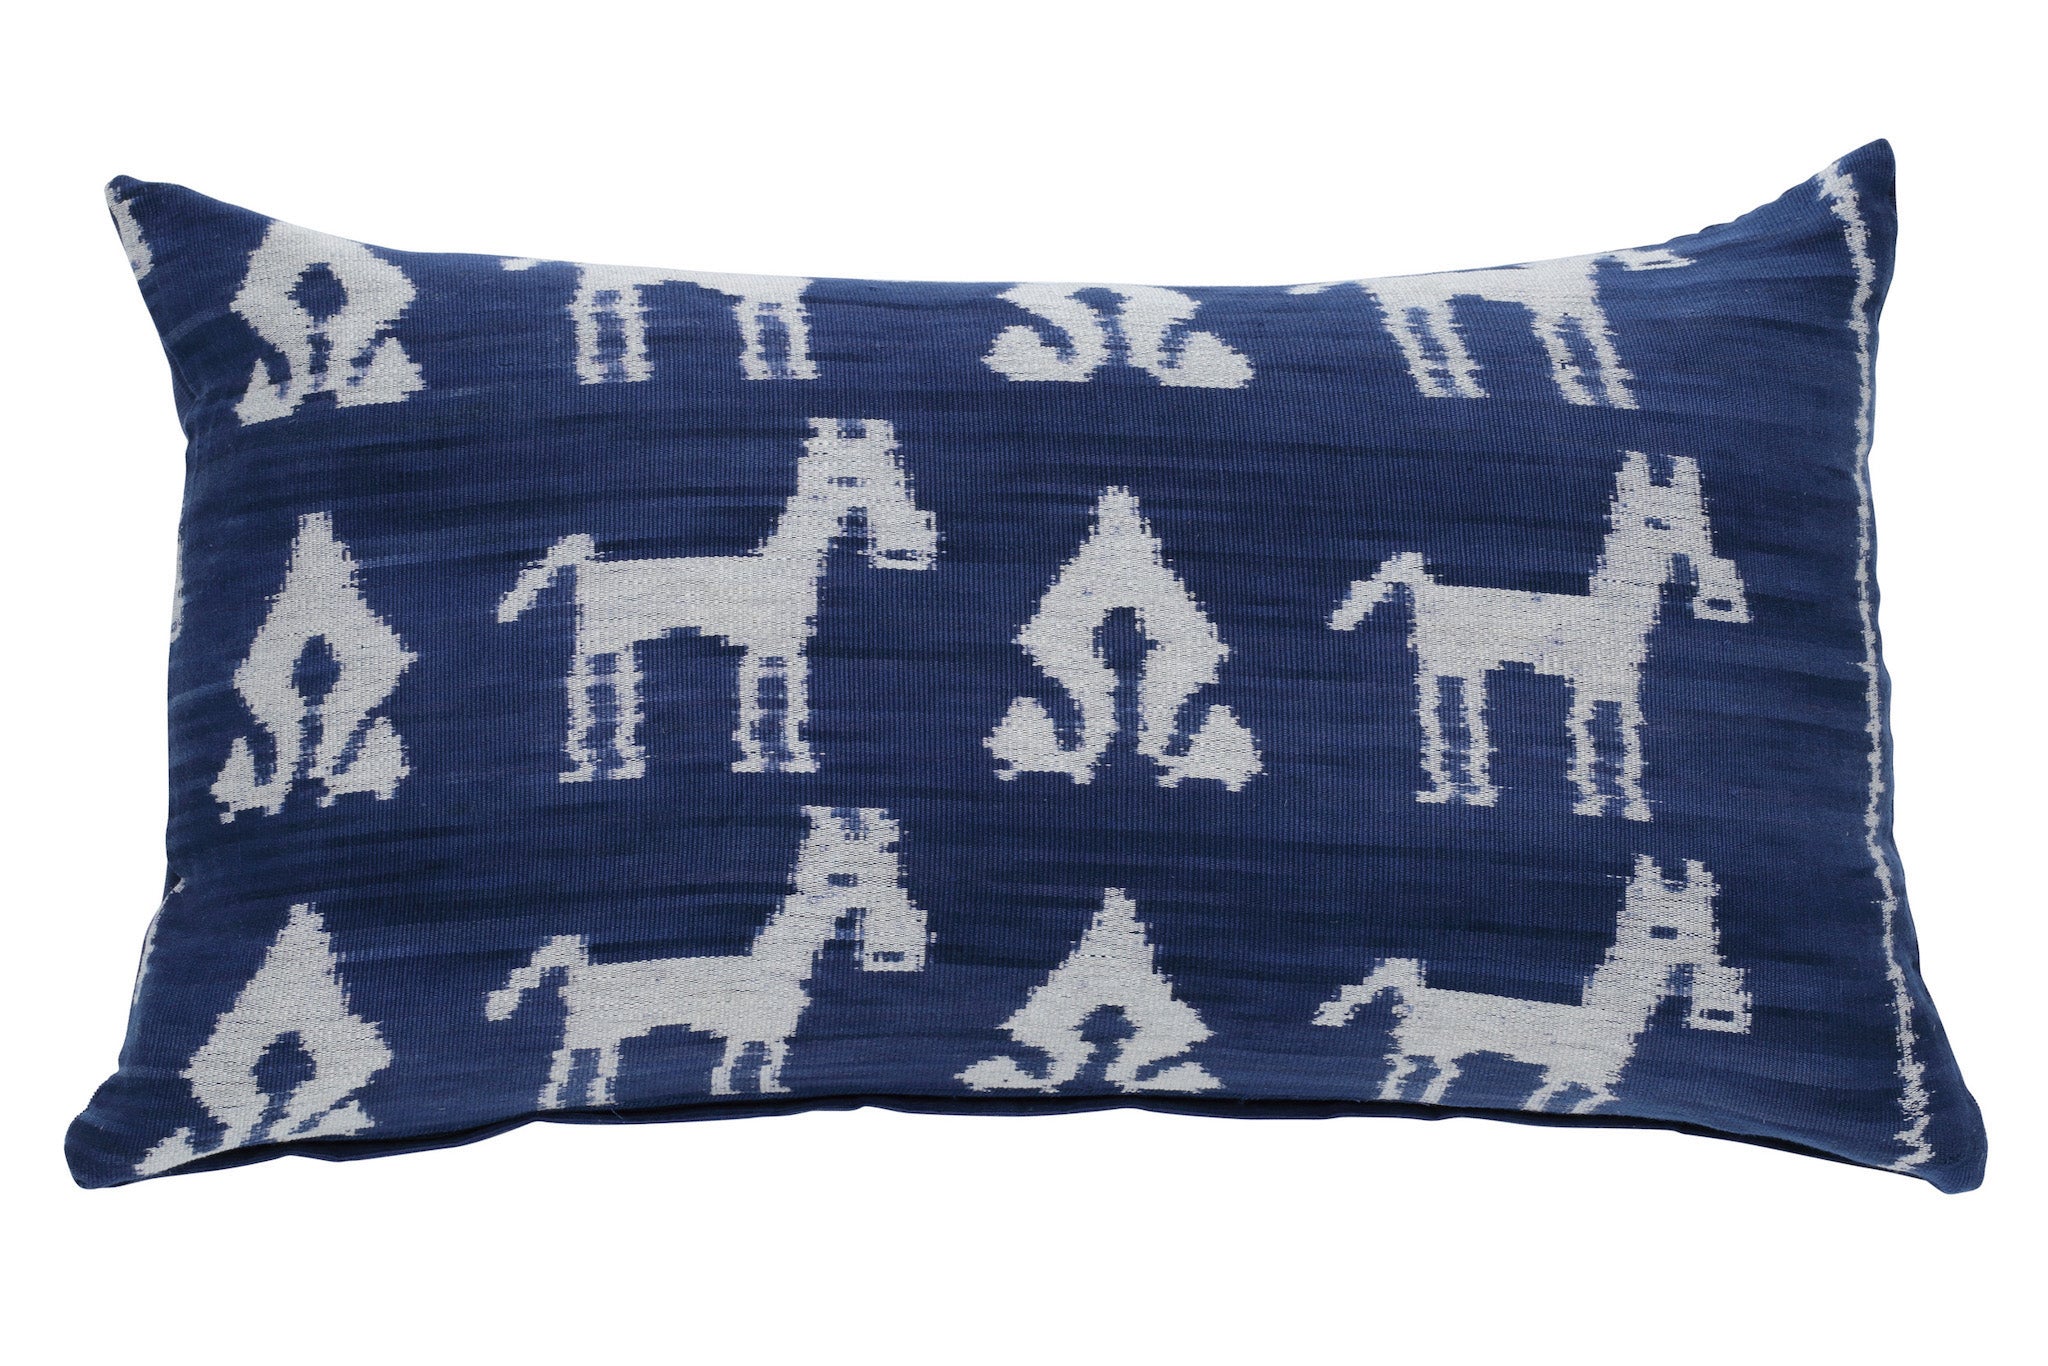 Navy Blue with White Horse and Feminine Symbols Ikat Hand Woven Scatter Rectangle Cushion from Sumba, Indonesia - FRONT